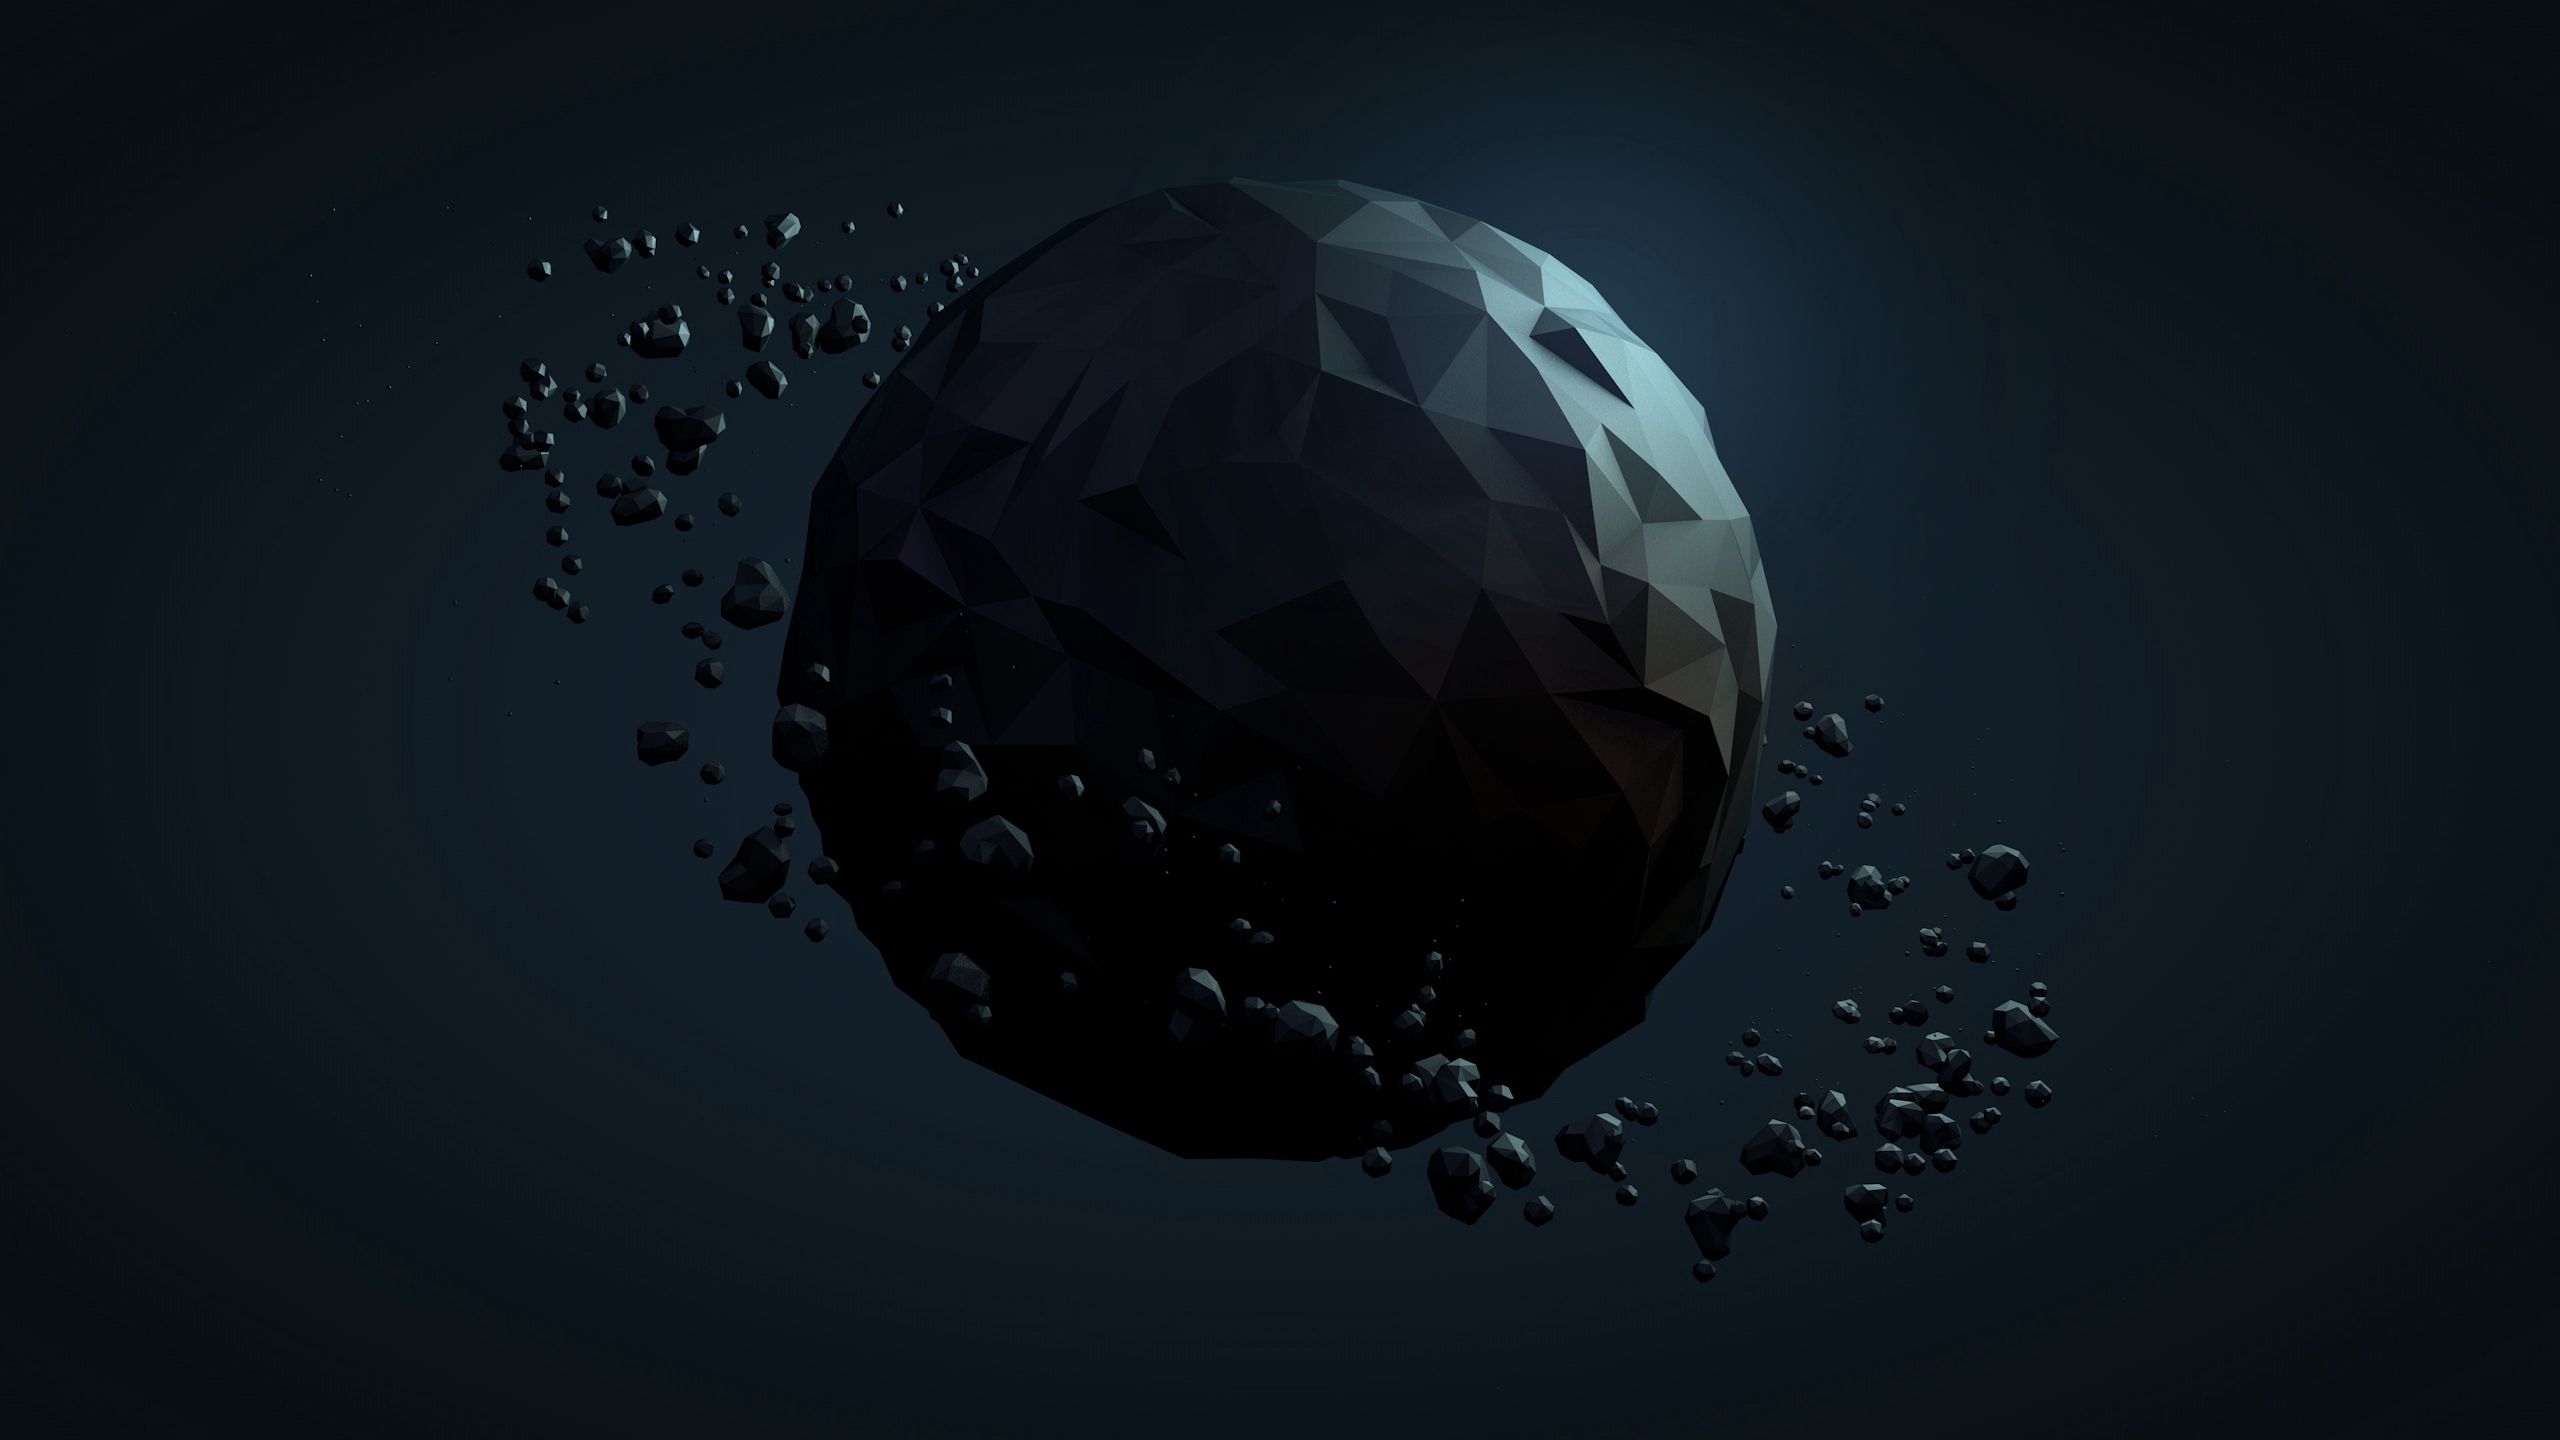 dark, abstract, background, ball, planet